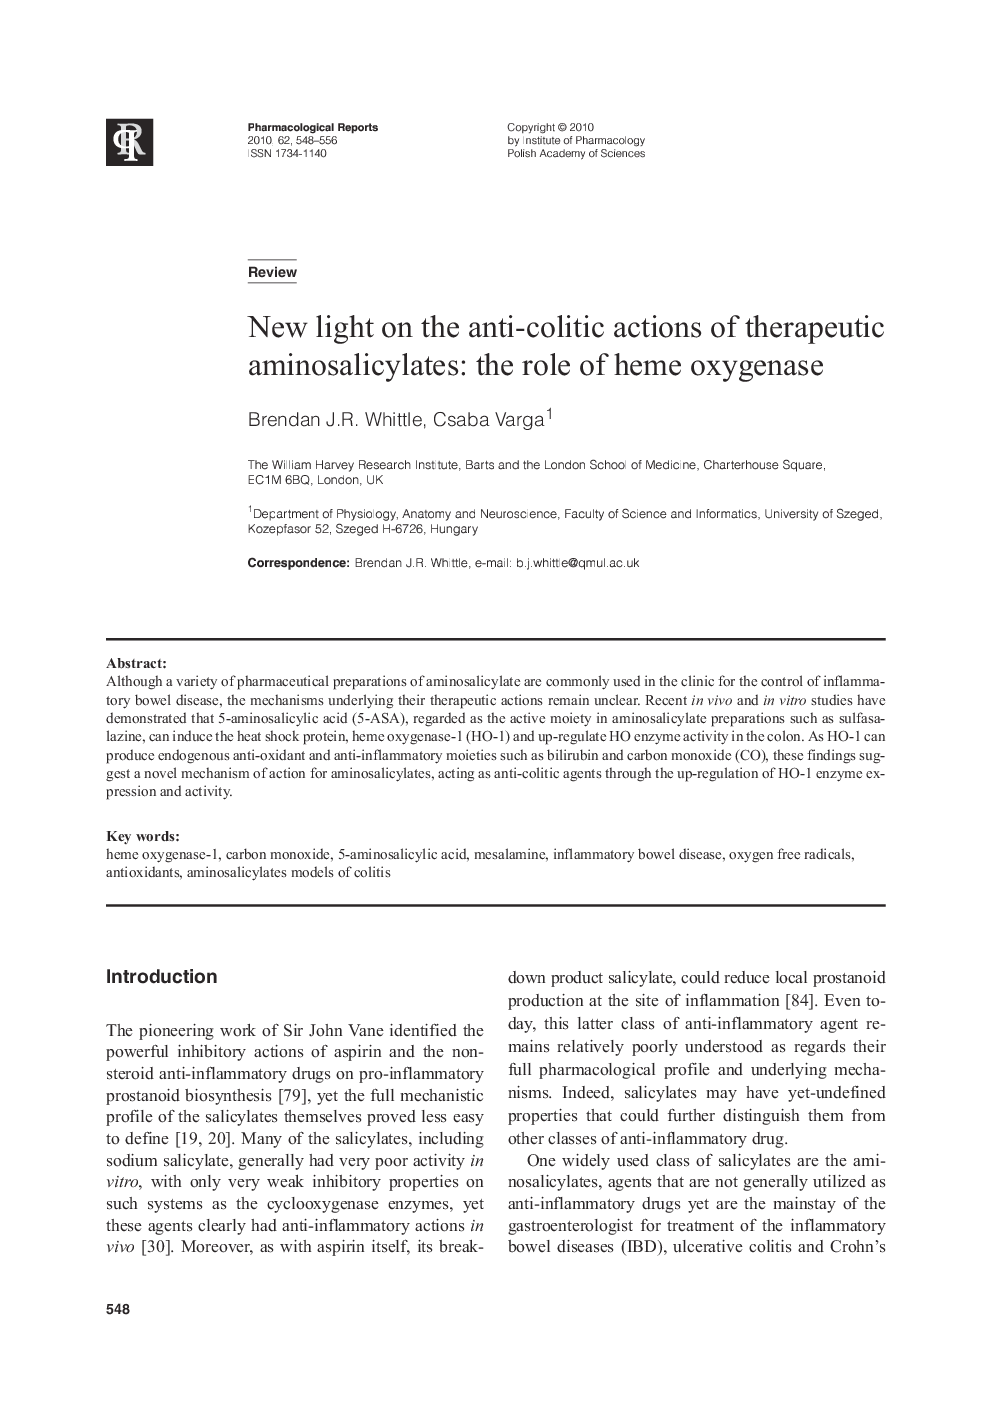 New light on the anti-colitic actions of therapeutic aminosalicylates: the role of heme oxygenase